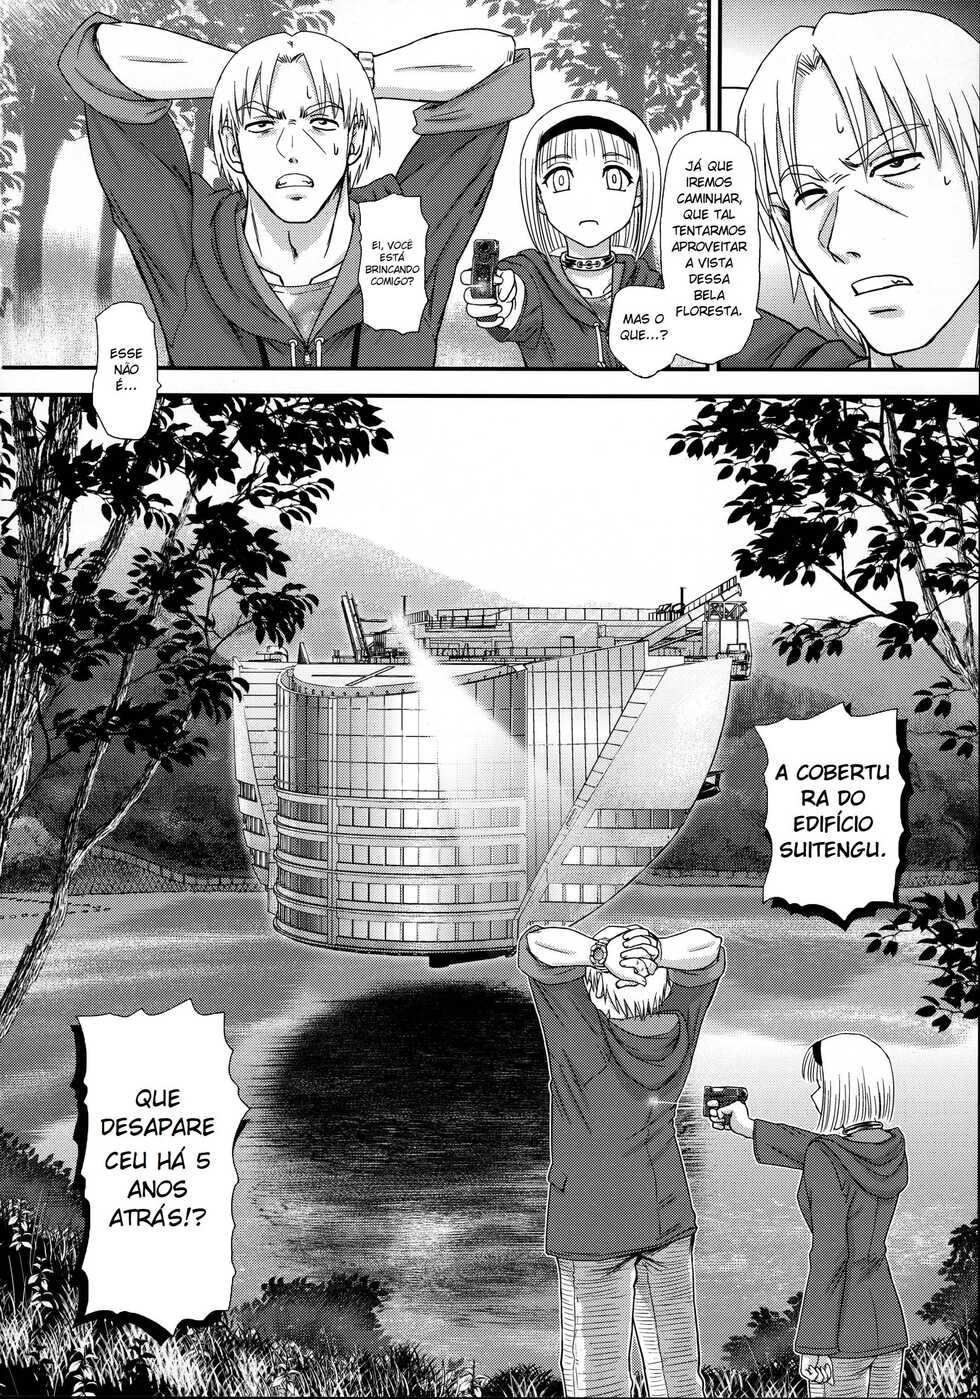 (C95) [Behind Moon (Dulce-Q)] DR:II ep.7 ~Dulce Report~ [Portuguese-BR] - Page 7